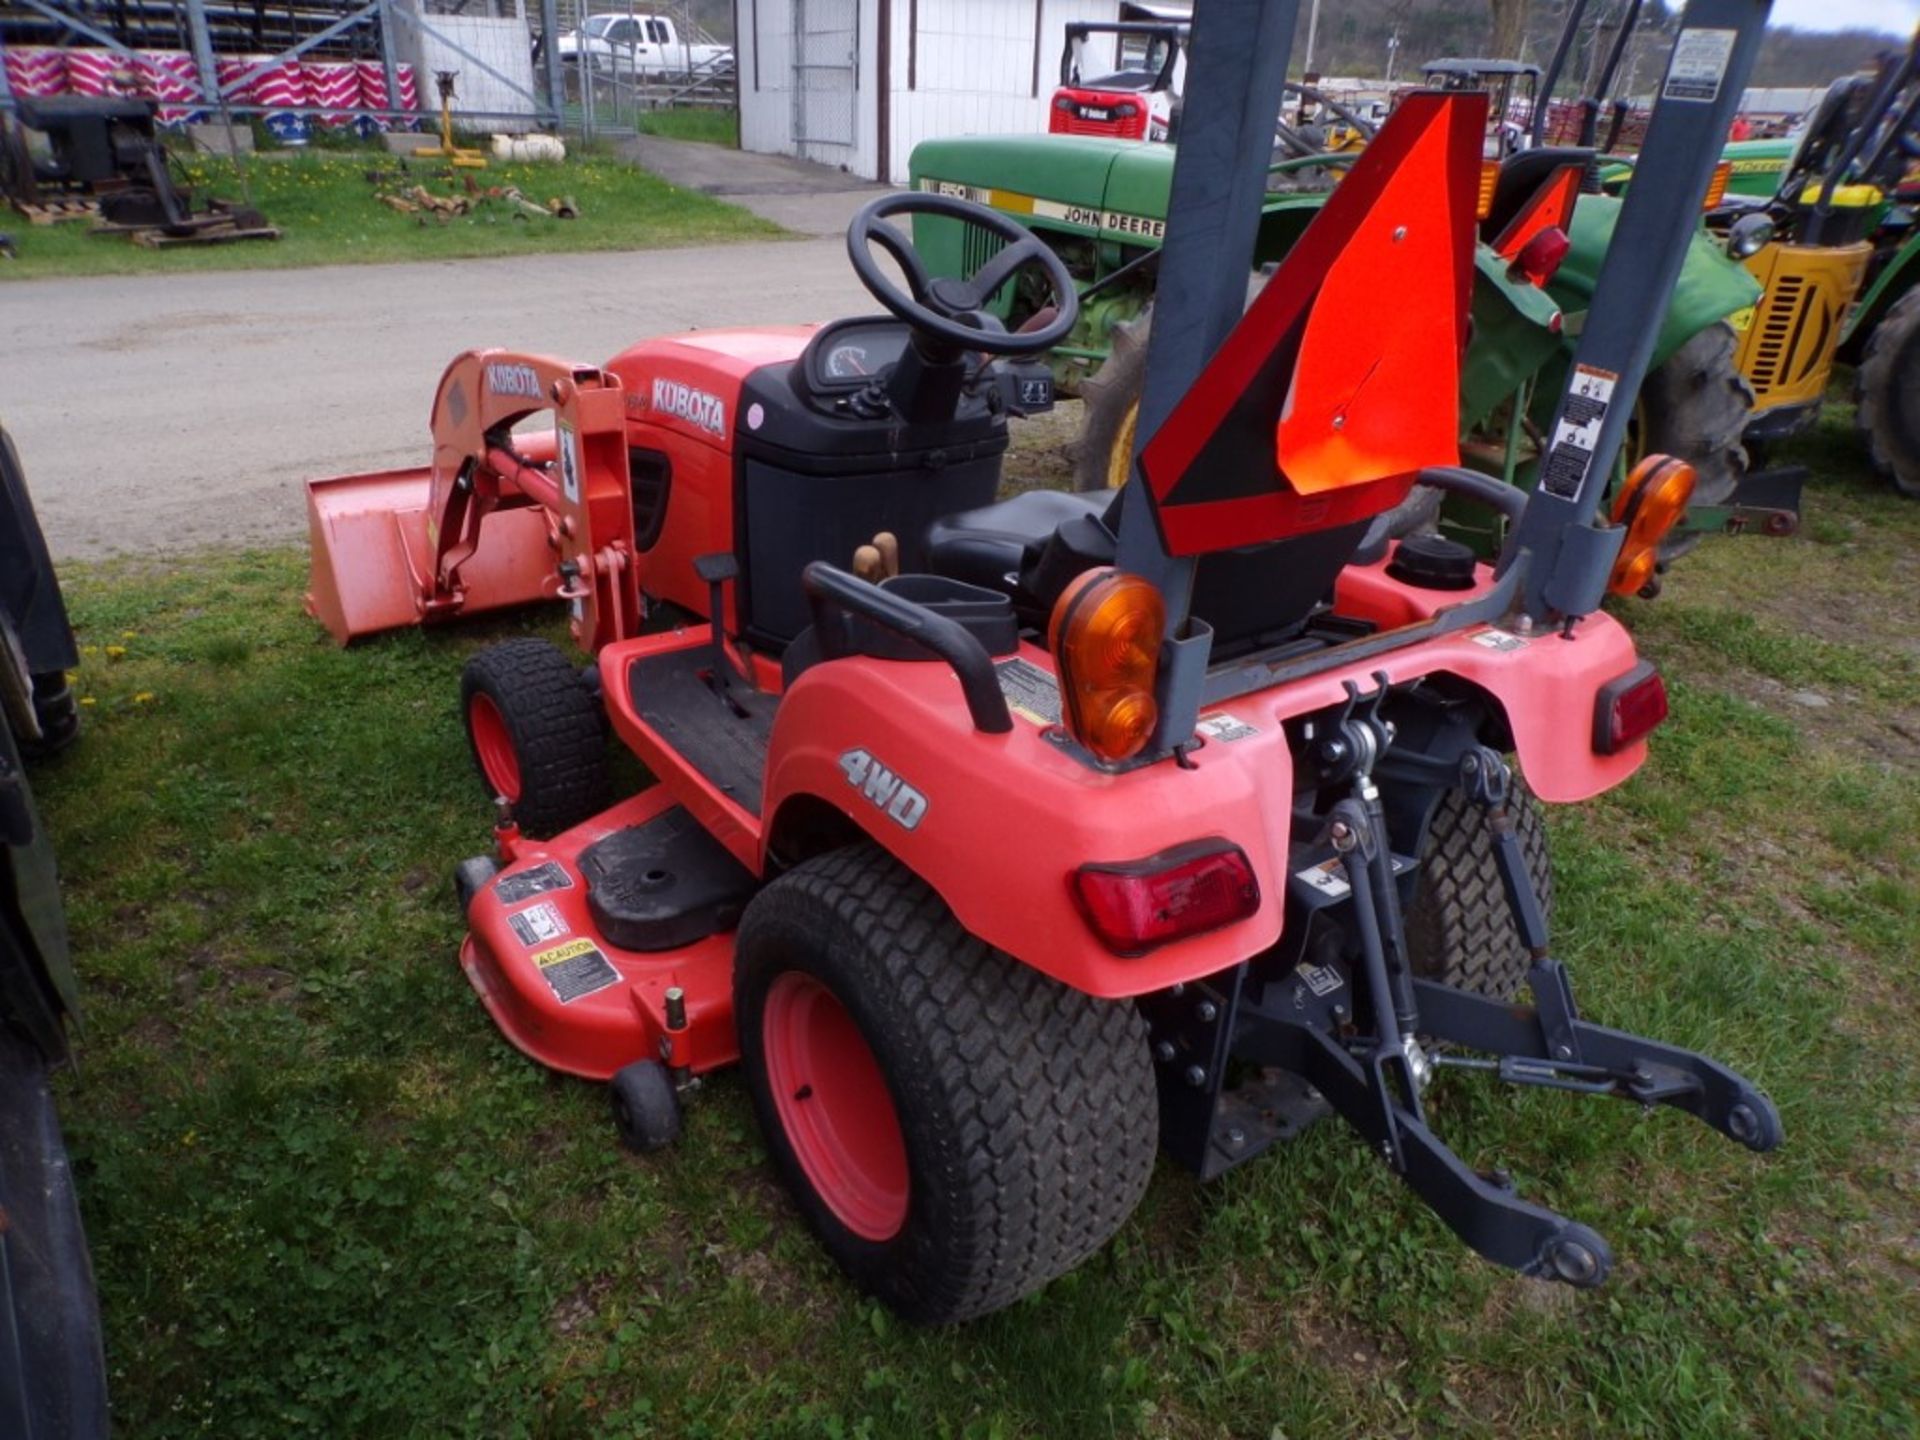 Kubota BX1870 Sub Compact Tractor w/ Loader And 54'' Belly Mower, 275 Hrs., S/N 25052 (4378) - Image 4 of 5